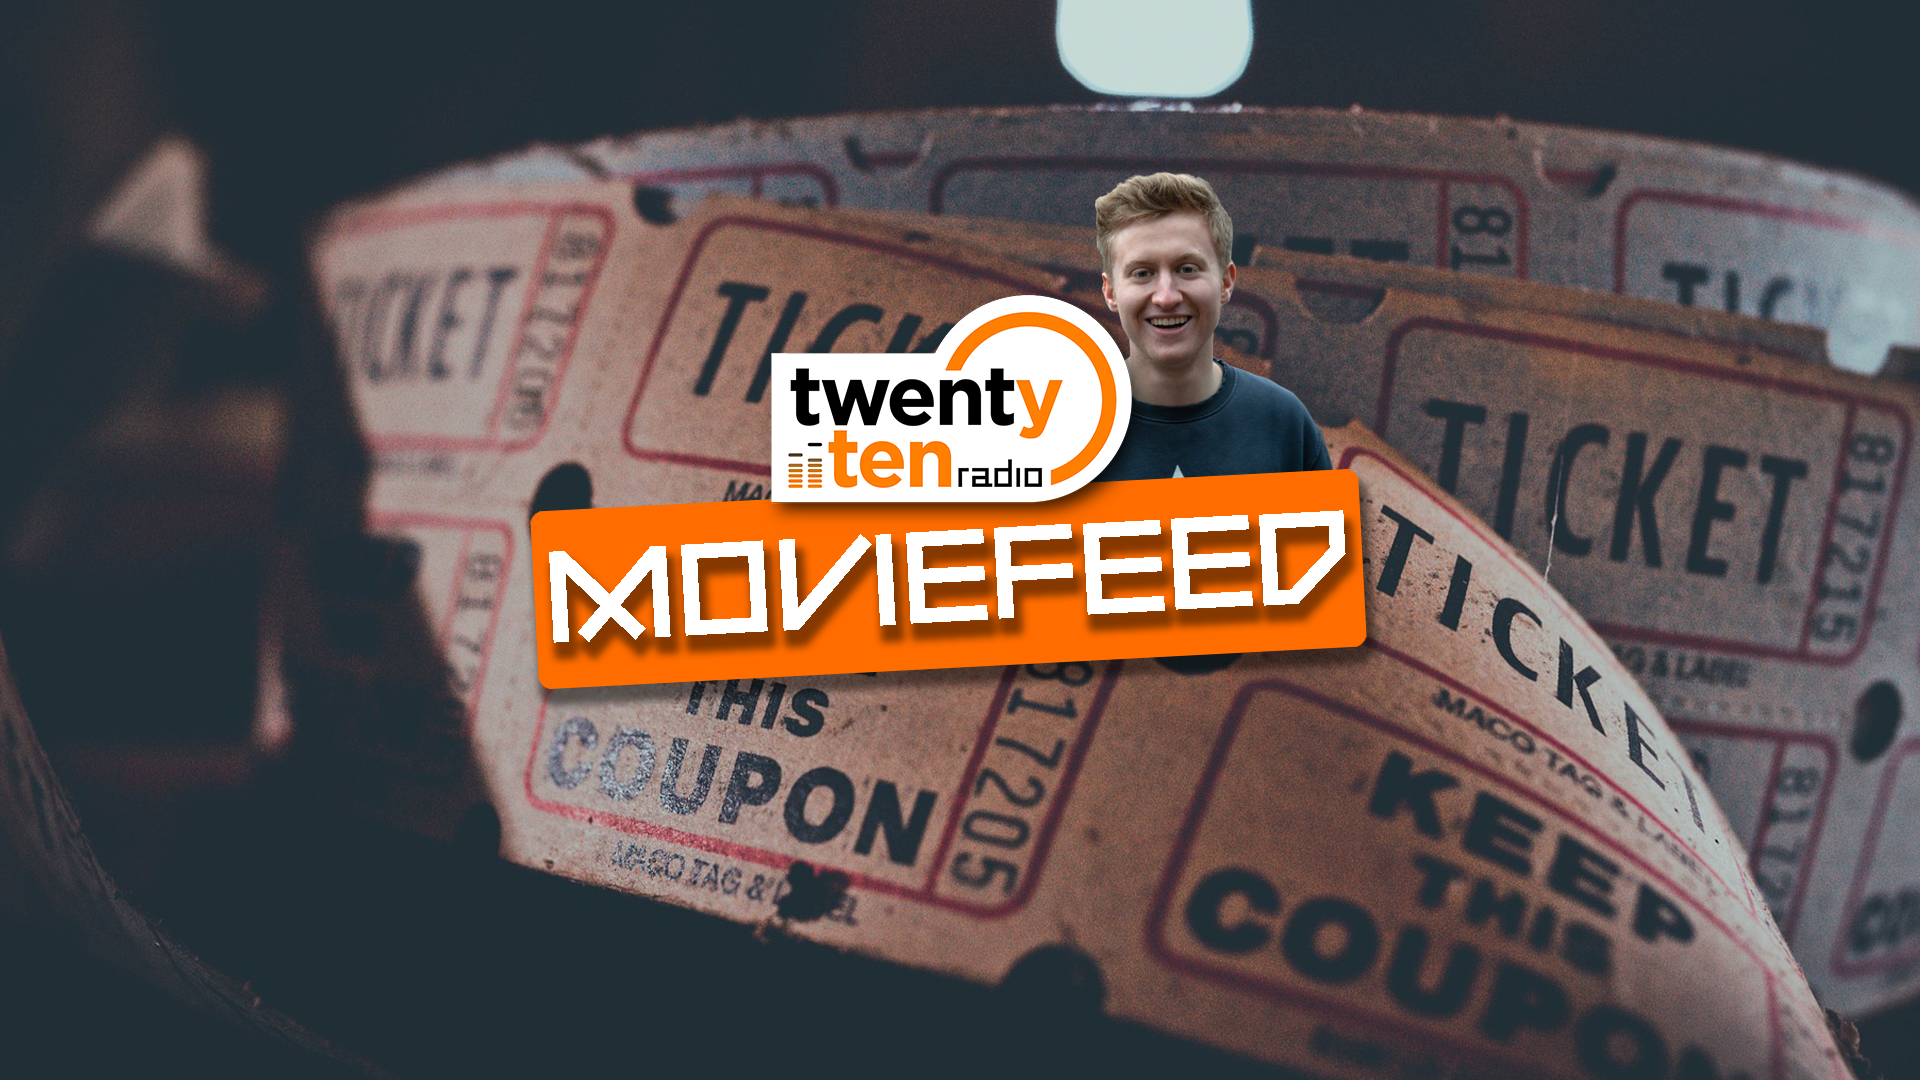 MOVIEFEED